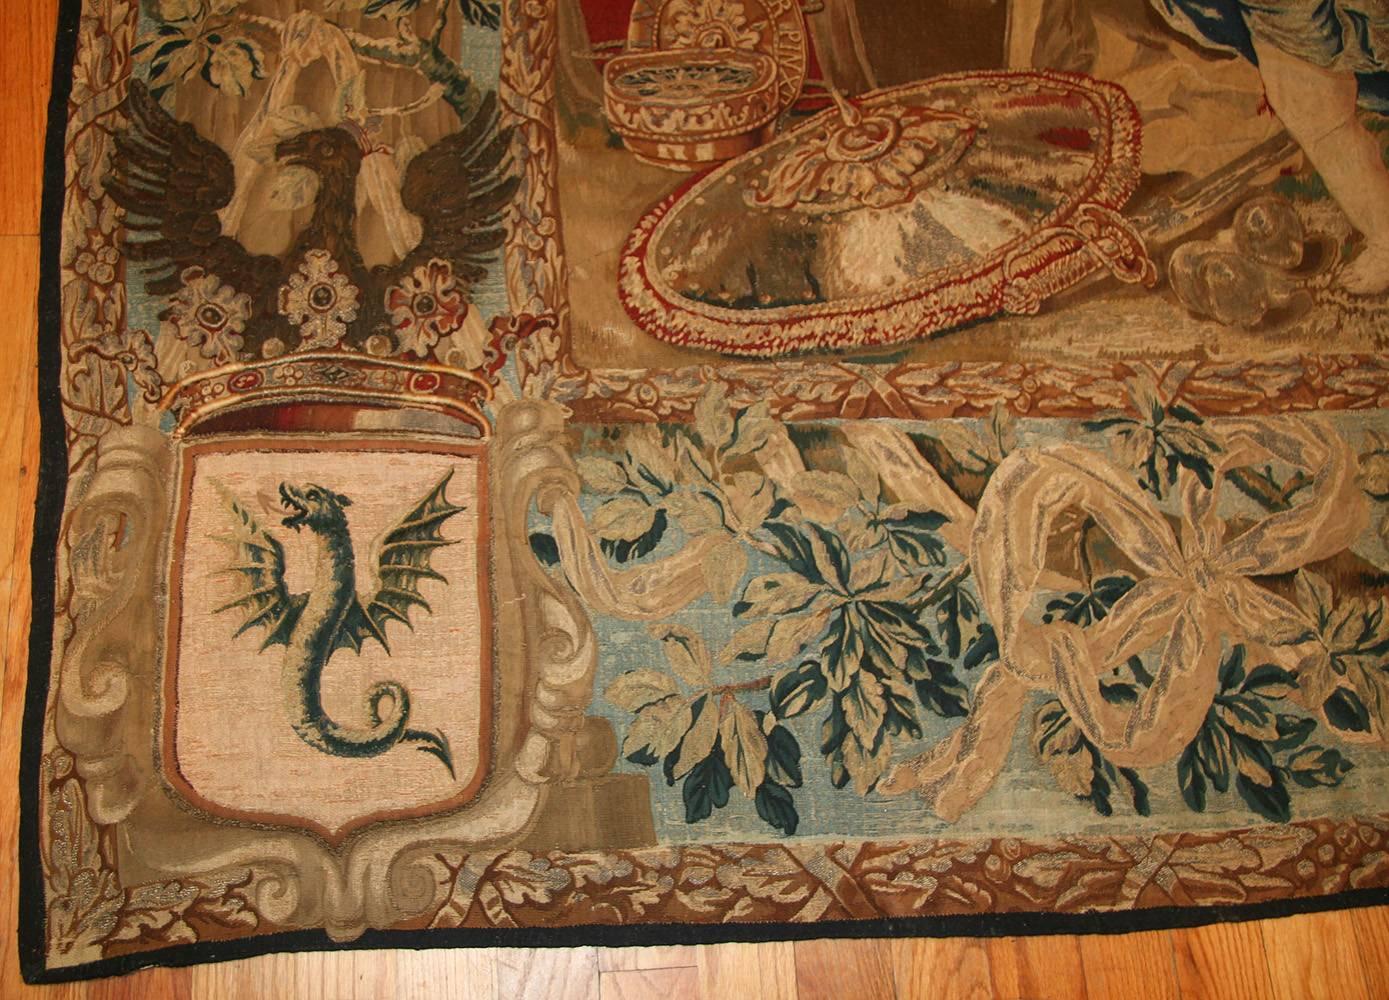 Rare and Beautiful Large Antique Flemish Heraldic Tapestry, Country of Origin: Belgium, Circa Date: 17th century. Size: 11 ft 10 in x 13 ft 3 in (3.61 m x 4.04 m)

Here we see a grand, fine, magnificent and important heraldic wall tapestry of